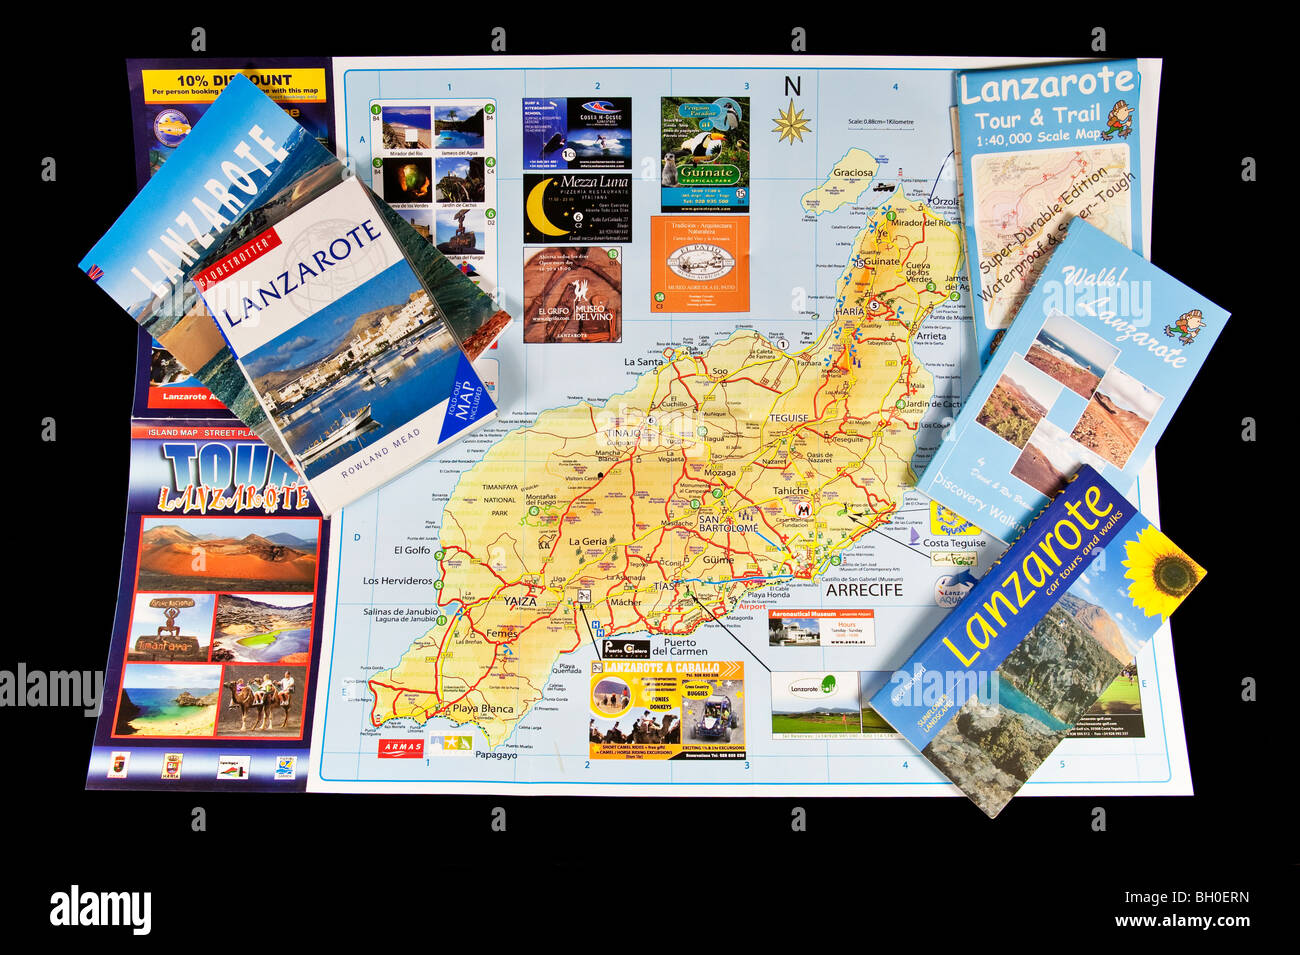 Tourist map and guide books for Lanzarote in the Canary Islands Stock Photo